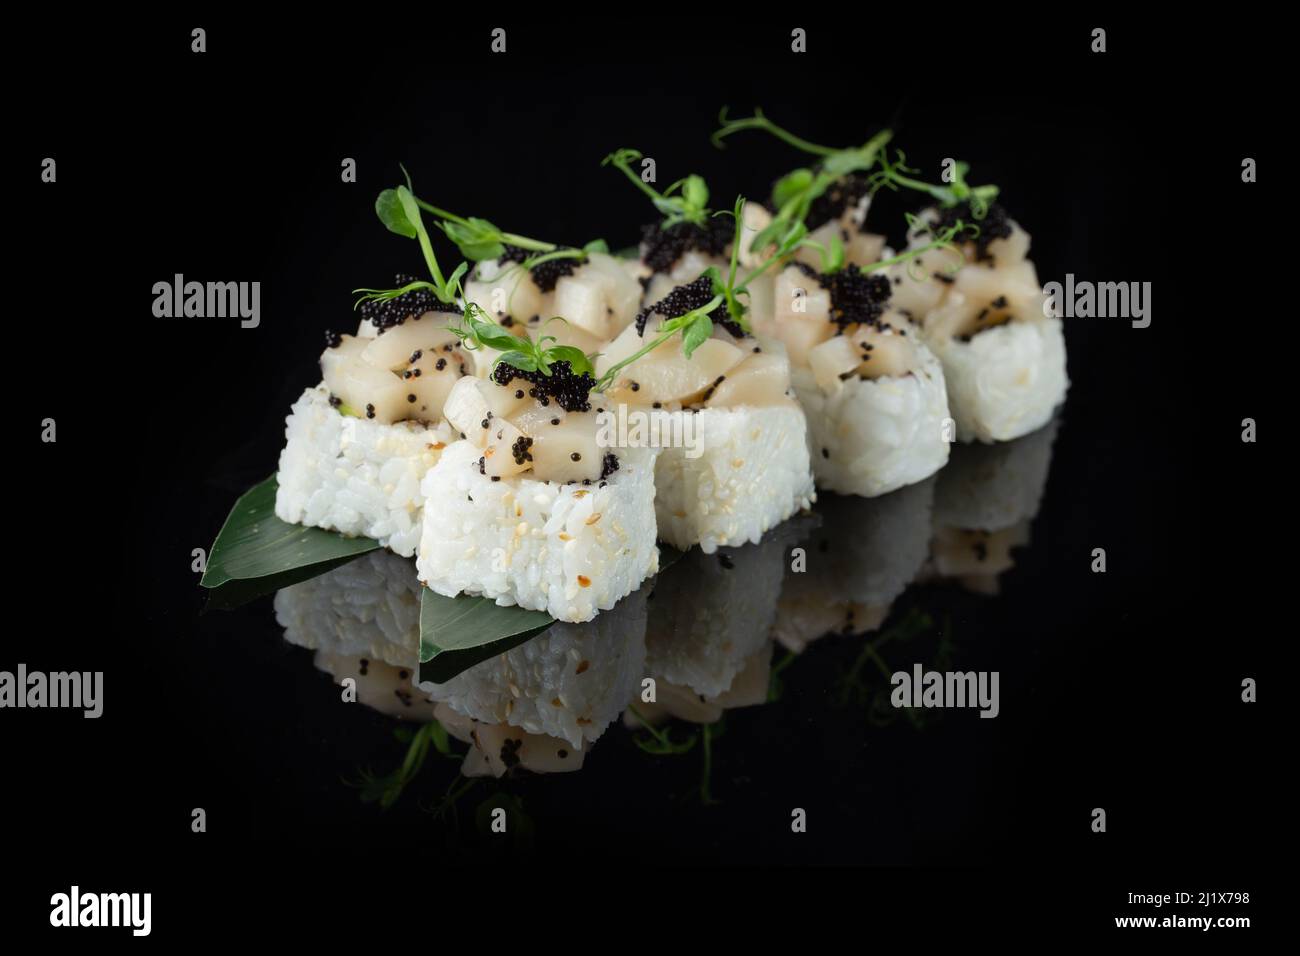 Traditional delicious fresh sushi roll set on a black background with reflection. Sushi roll with rice, nori, cream cheese, tobiko caviar, avocado. Su Stock Photo